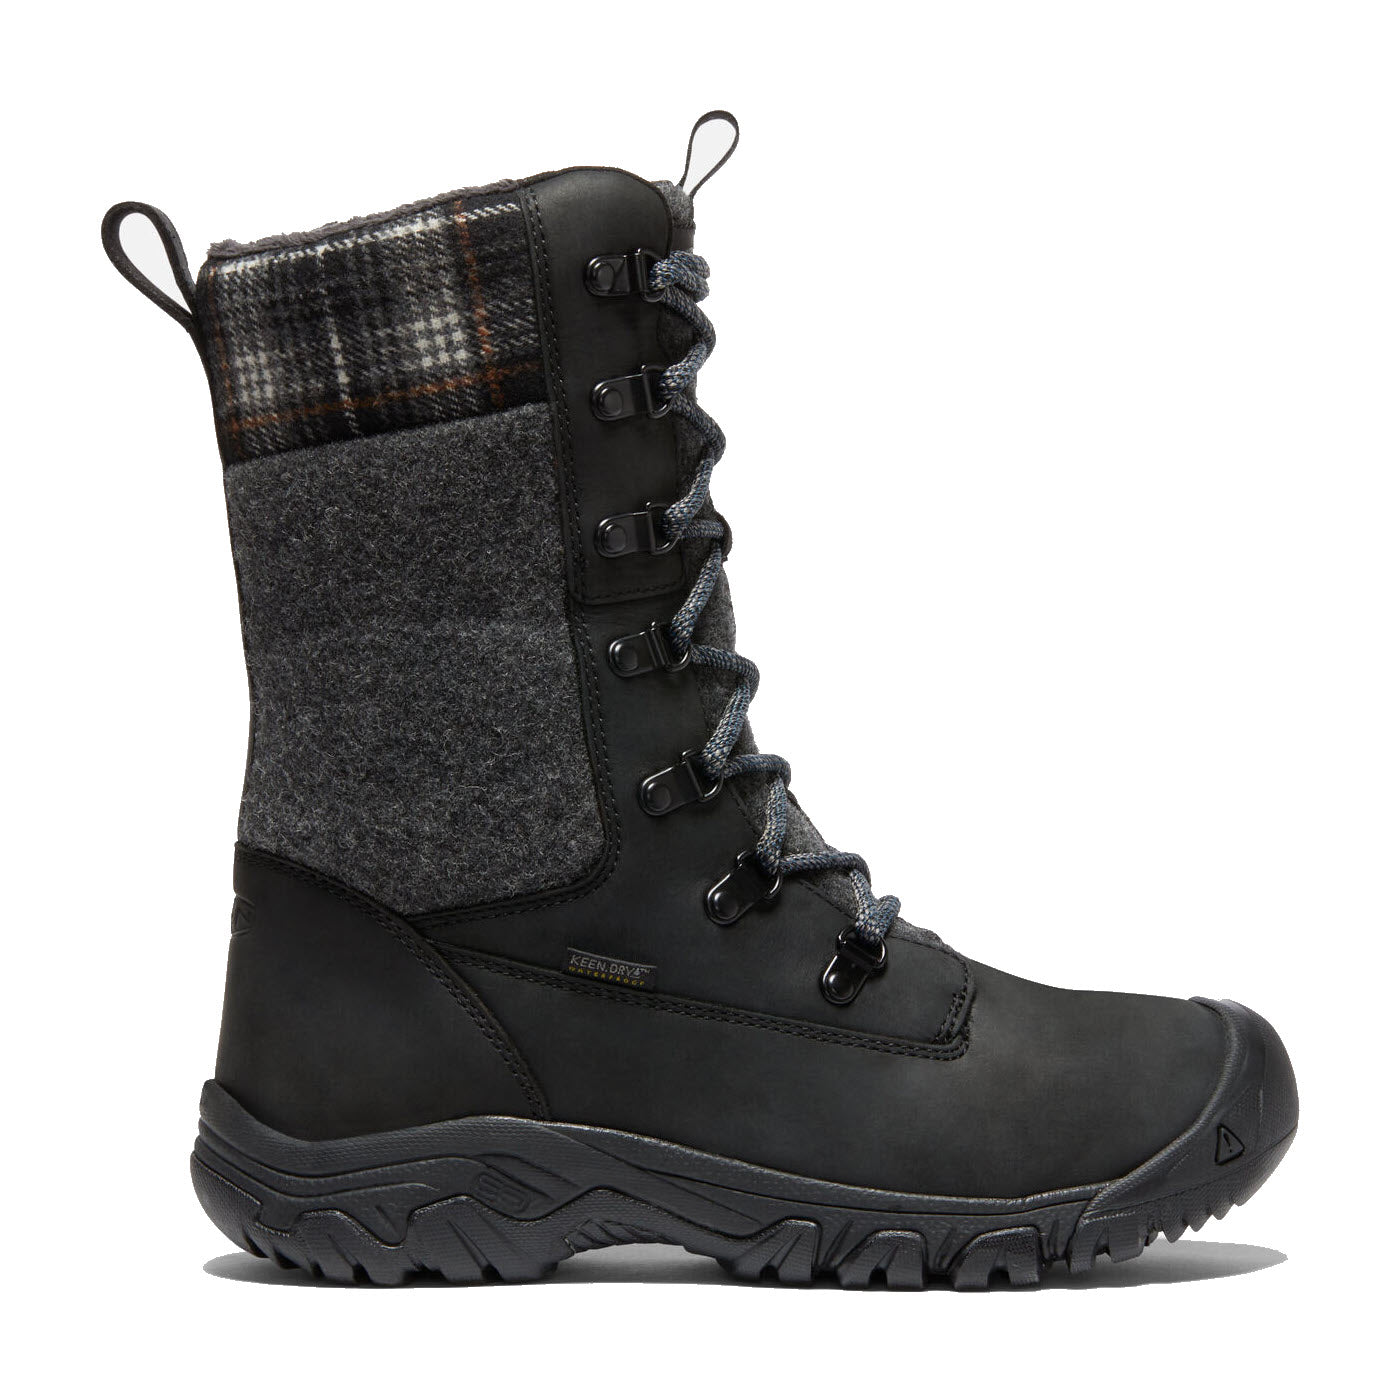 Men's winter boot with plaid detailing, lace-up front, and Keen.Dry membrane.